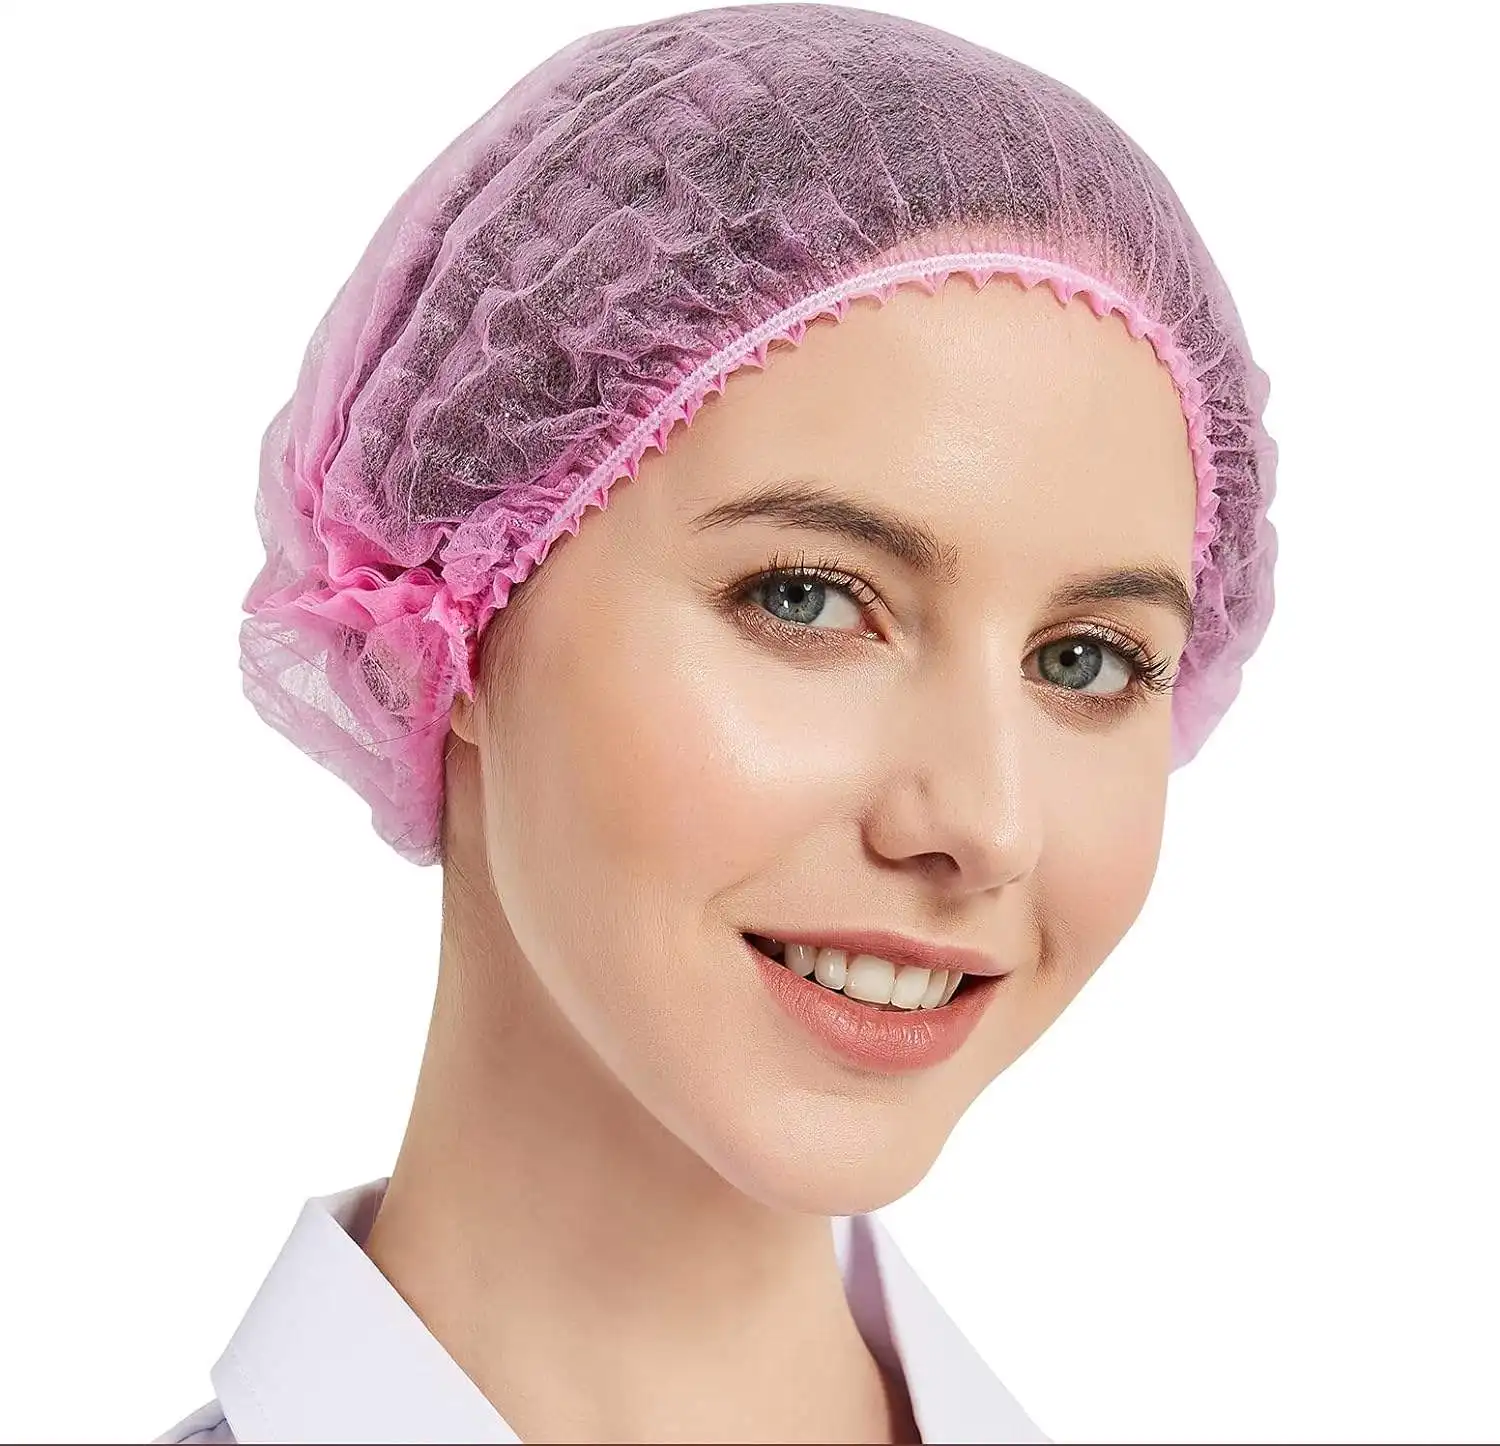 Chinese Factory Disposable Non Woven Surgical Caps Medical Bouffant Cap Nurses Hats Cap With lower Price